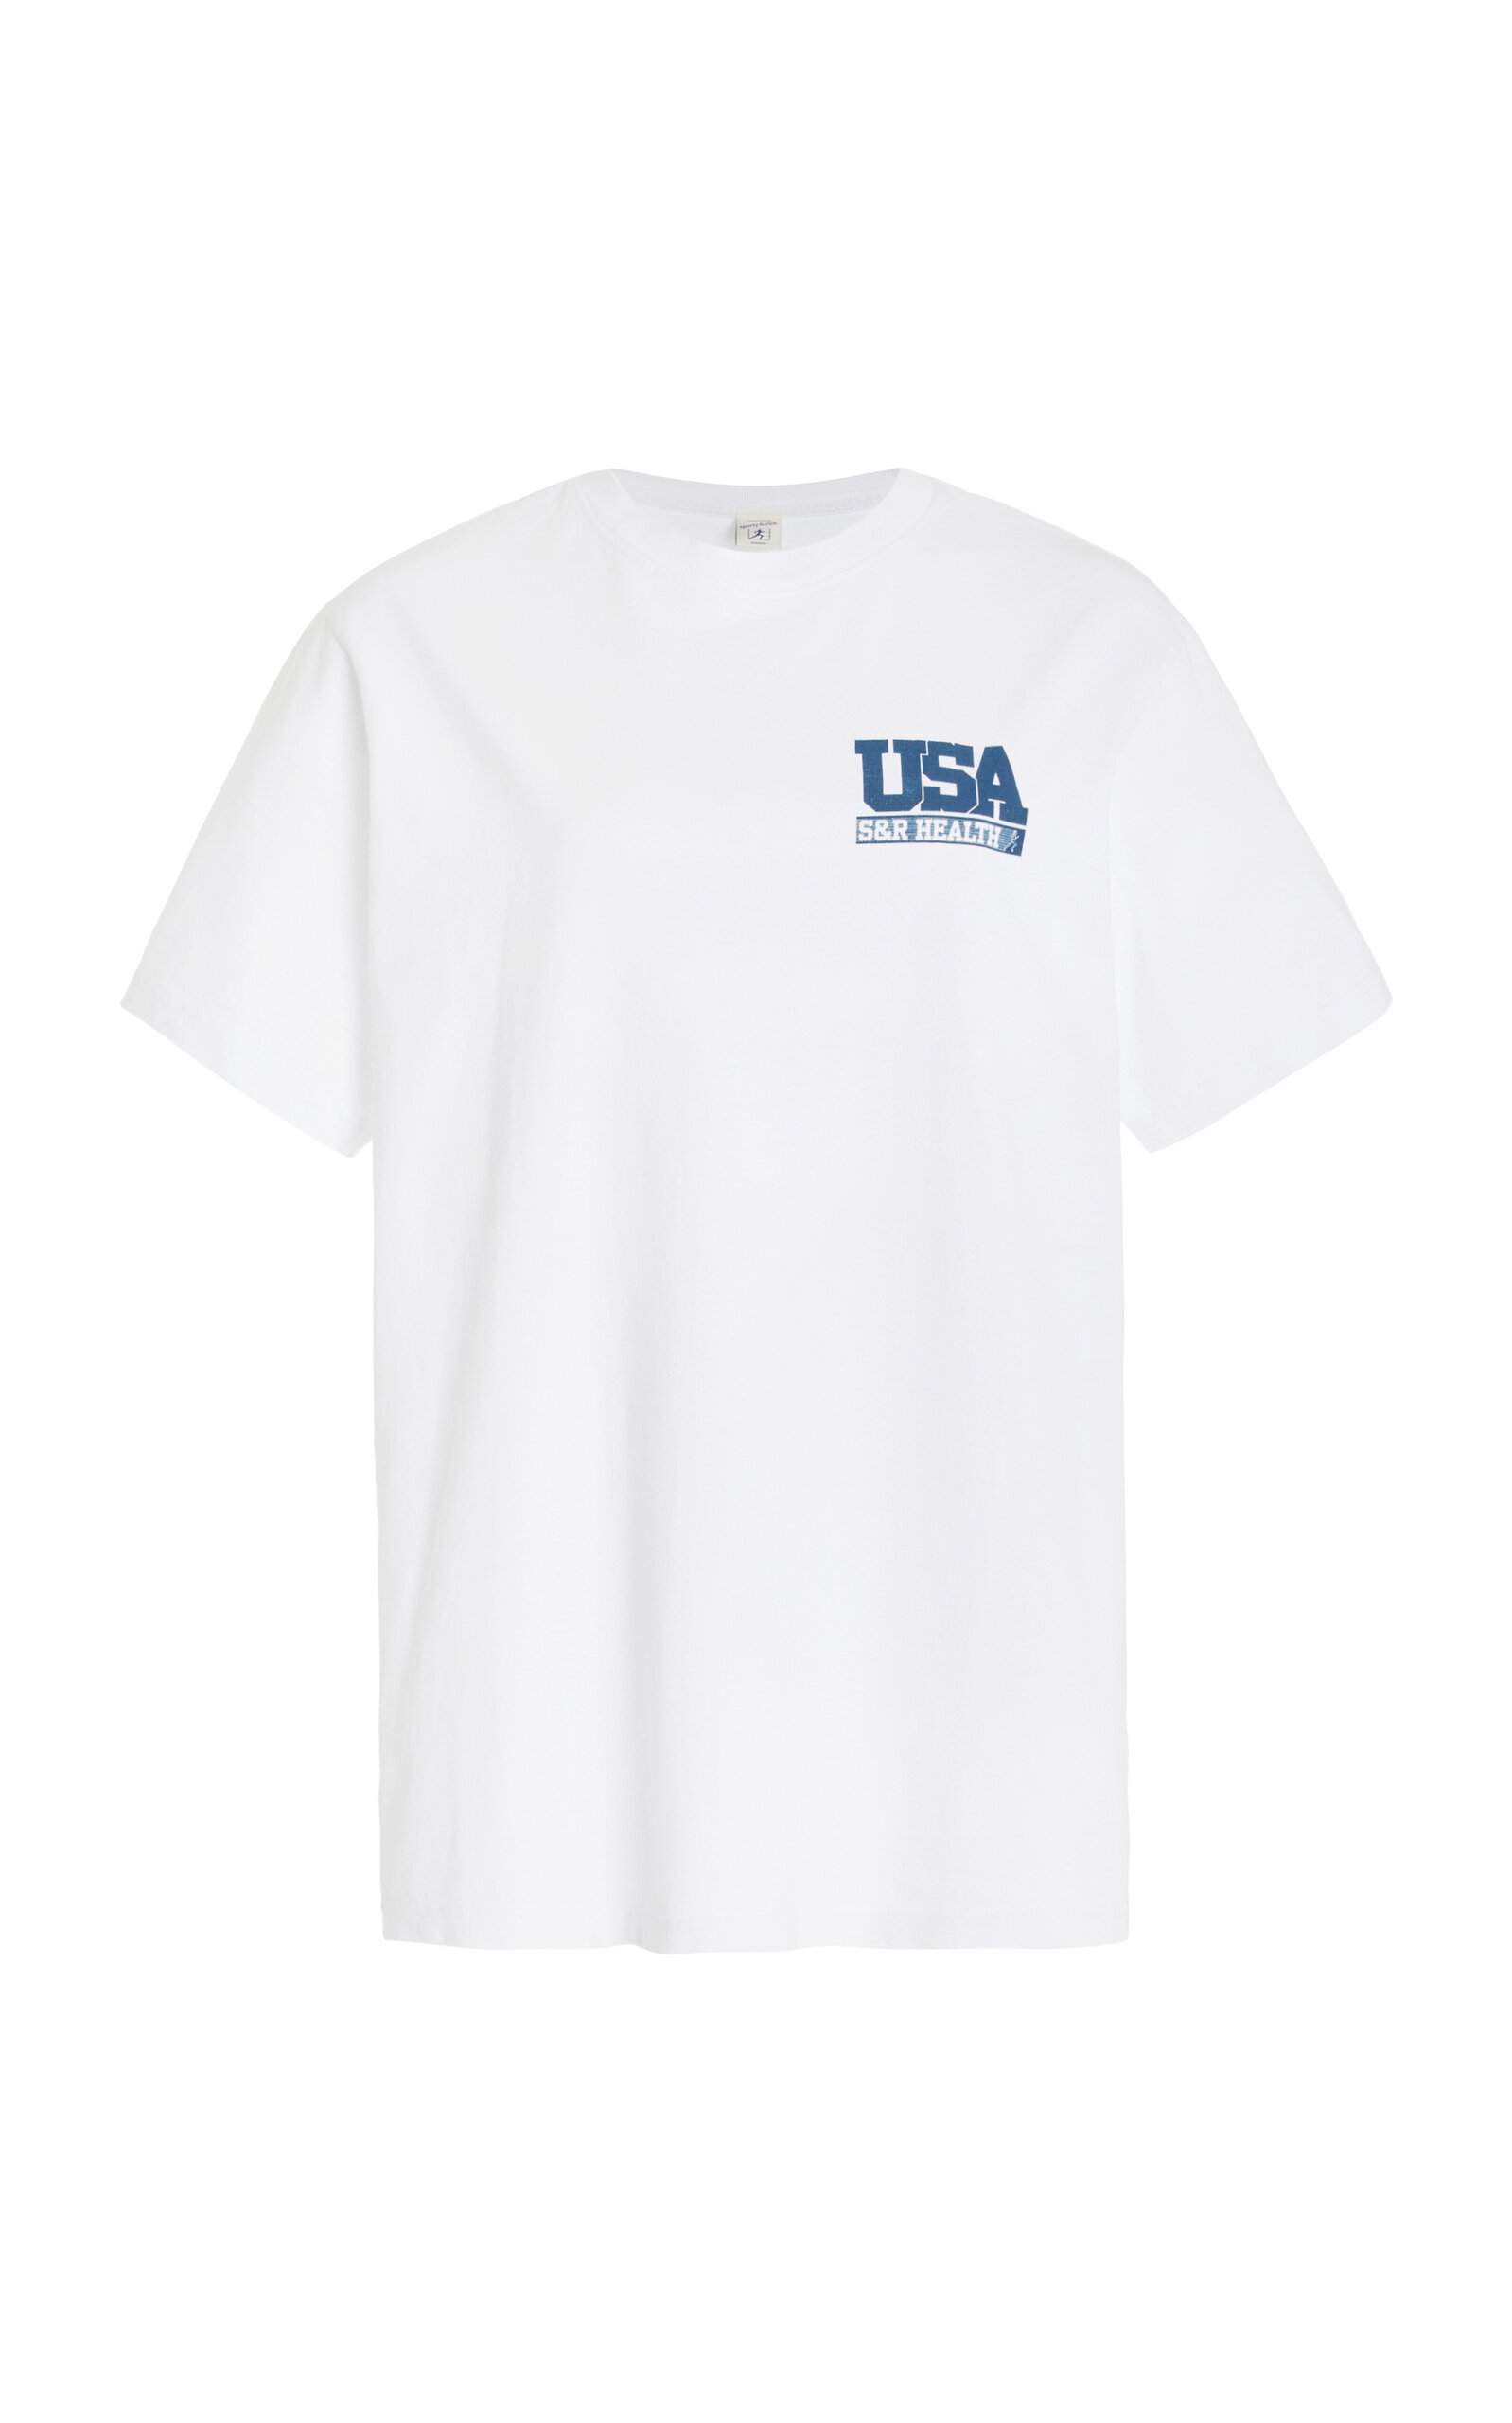 SPORTY AND RICH TEAM USA COTTON T-SHIRT